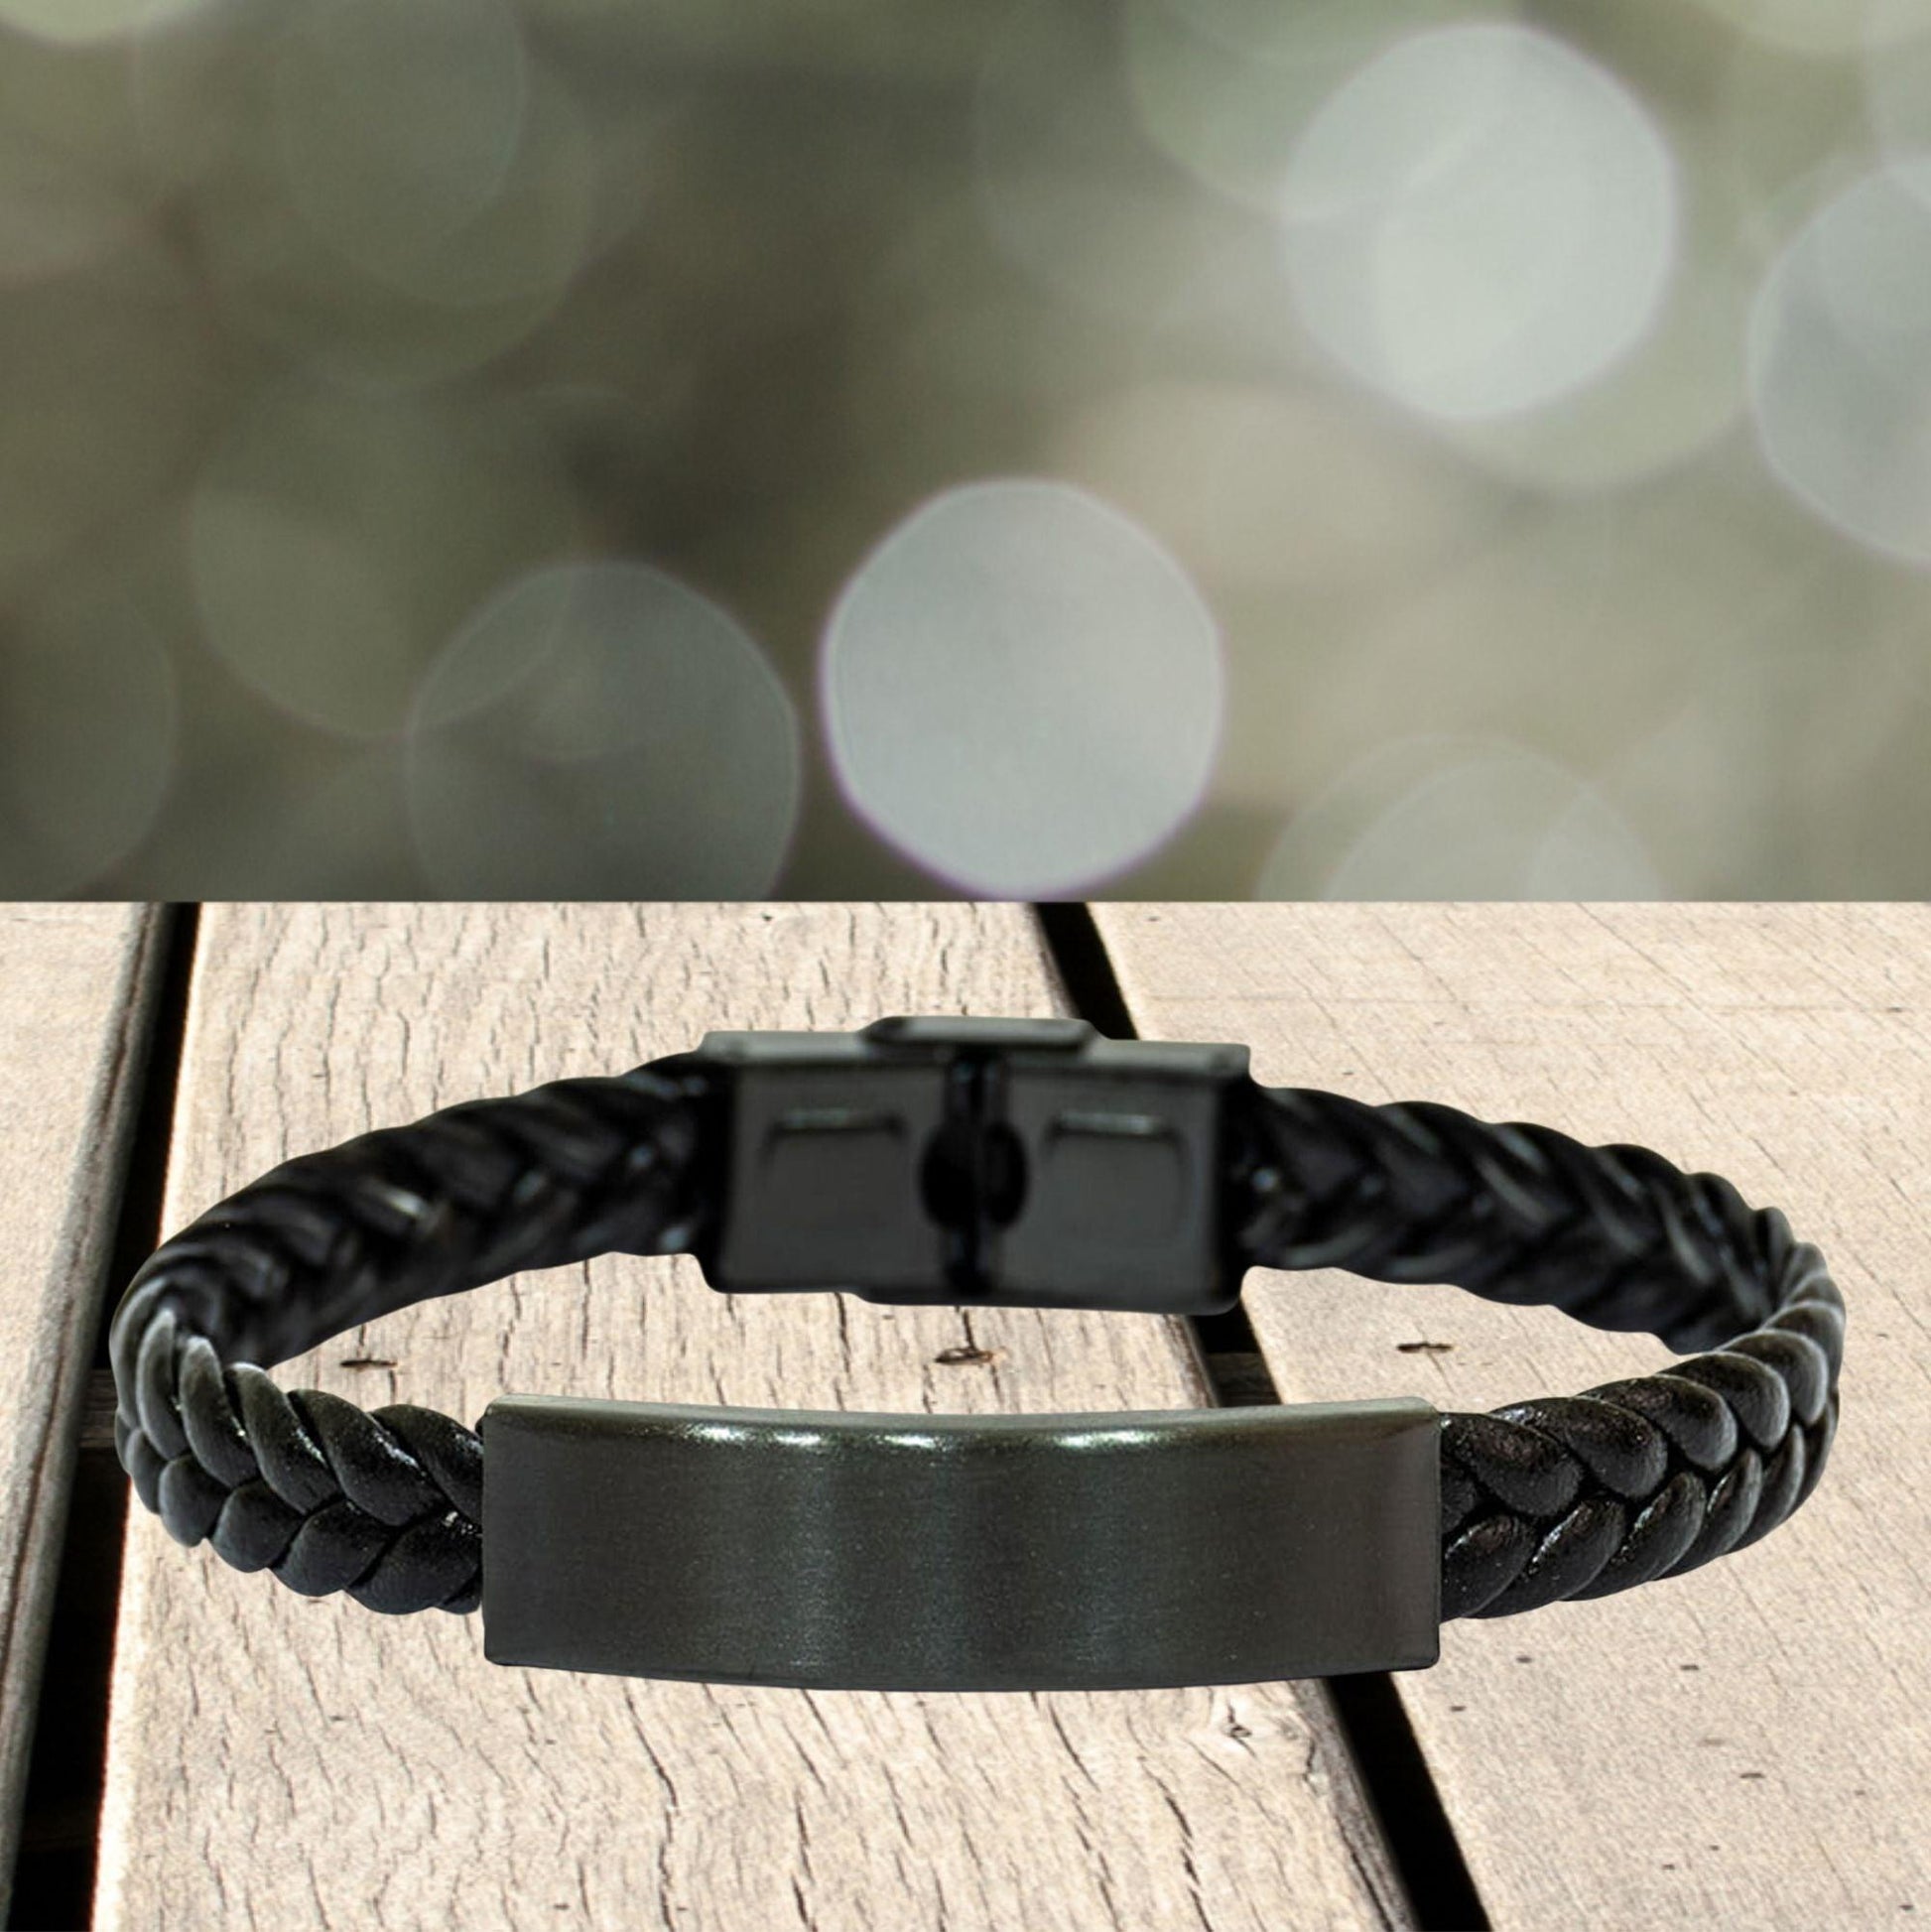 Single Mom Christmas Perfect Gifts, Single Mom Braided Leather Bracelet, Motivational Single Mom Engraved Gifts, Birthday Gifts For Single Mom, To My Single Mom Life is learning to dance in the rain, finding good in each day. I'm always with you - Mallard Moon Gift Shop